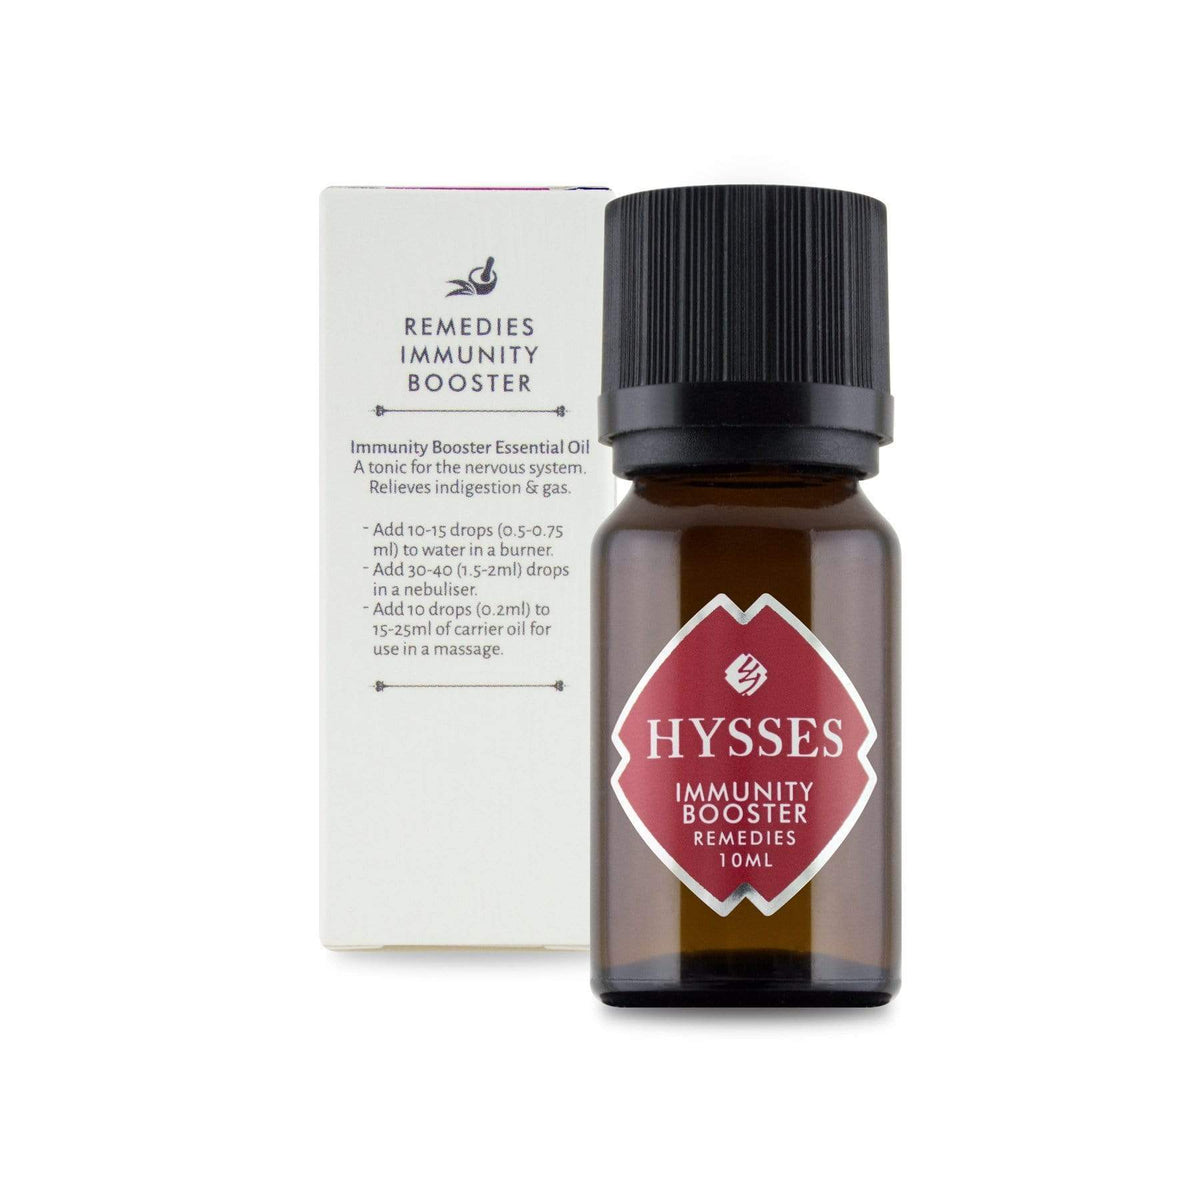 Hysses Essential Oil Remedies, Immunity Booster